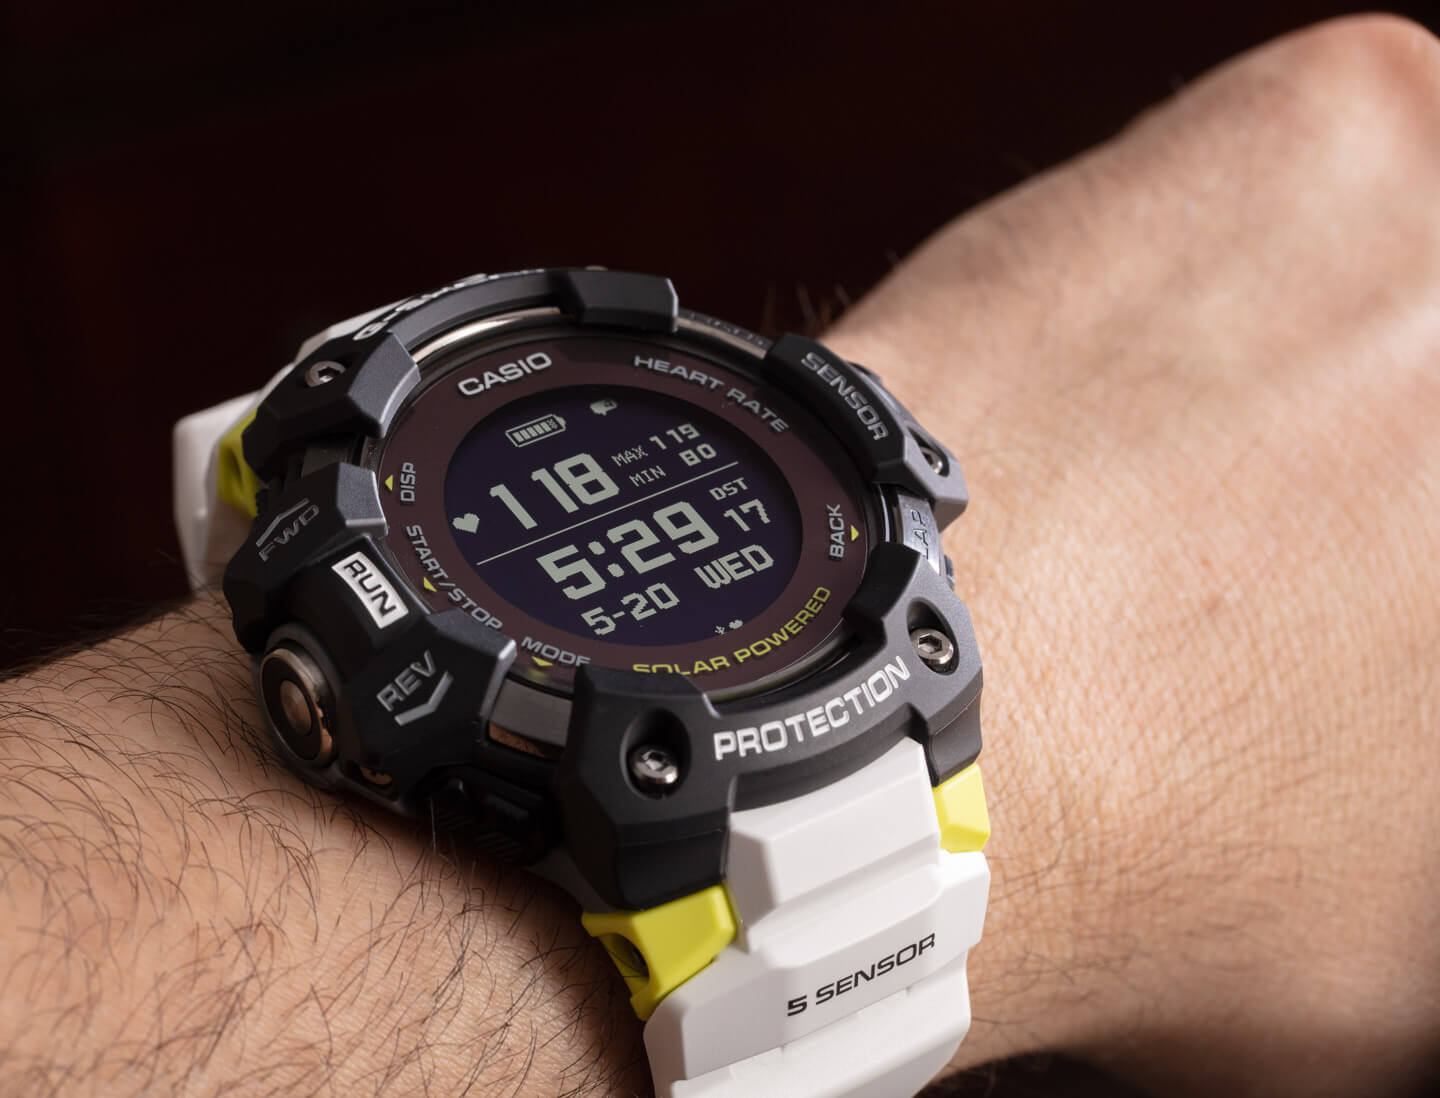 Quickstart Guide To Exercise Tracking With The Casio G-Shock Move GBDH1000  | aBlogtoWatch